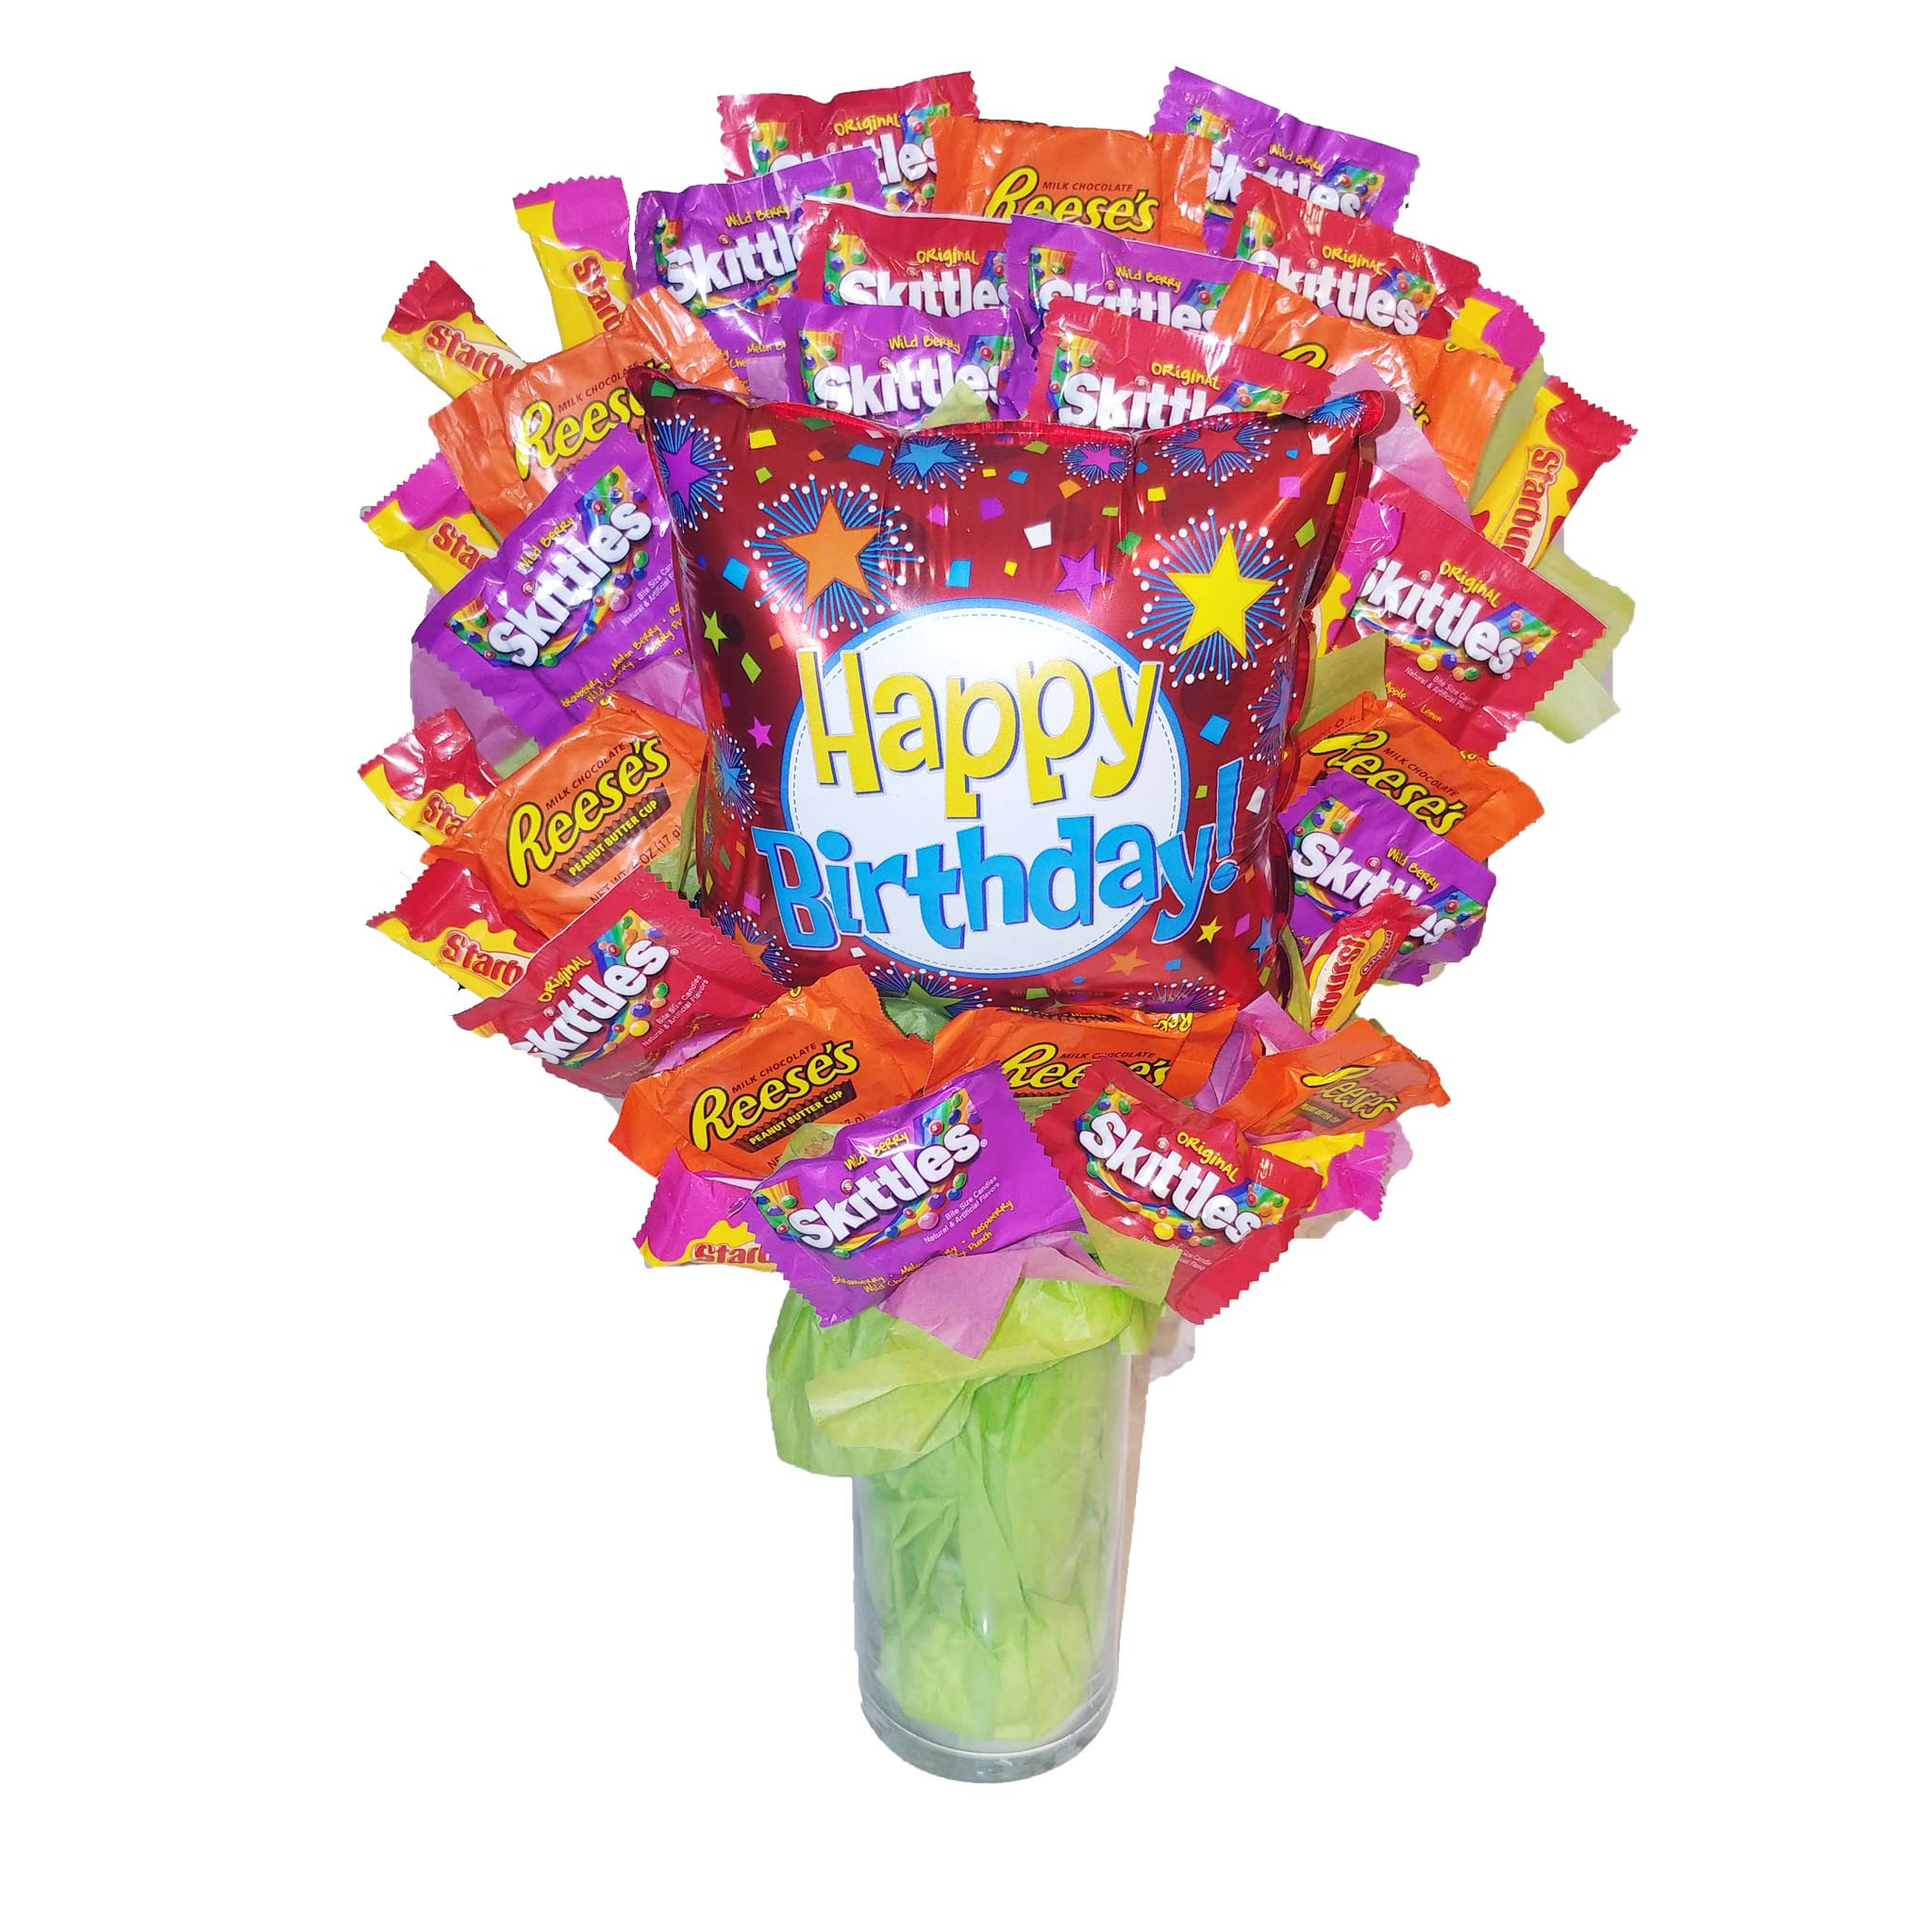 Skittles and Starburst Candy Bouquet Birthday - Anniversary's Gift – Smiles  For All Occasions